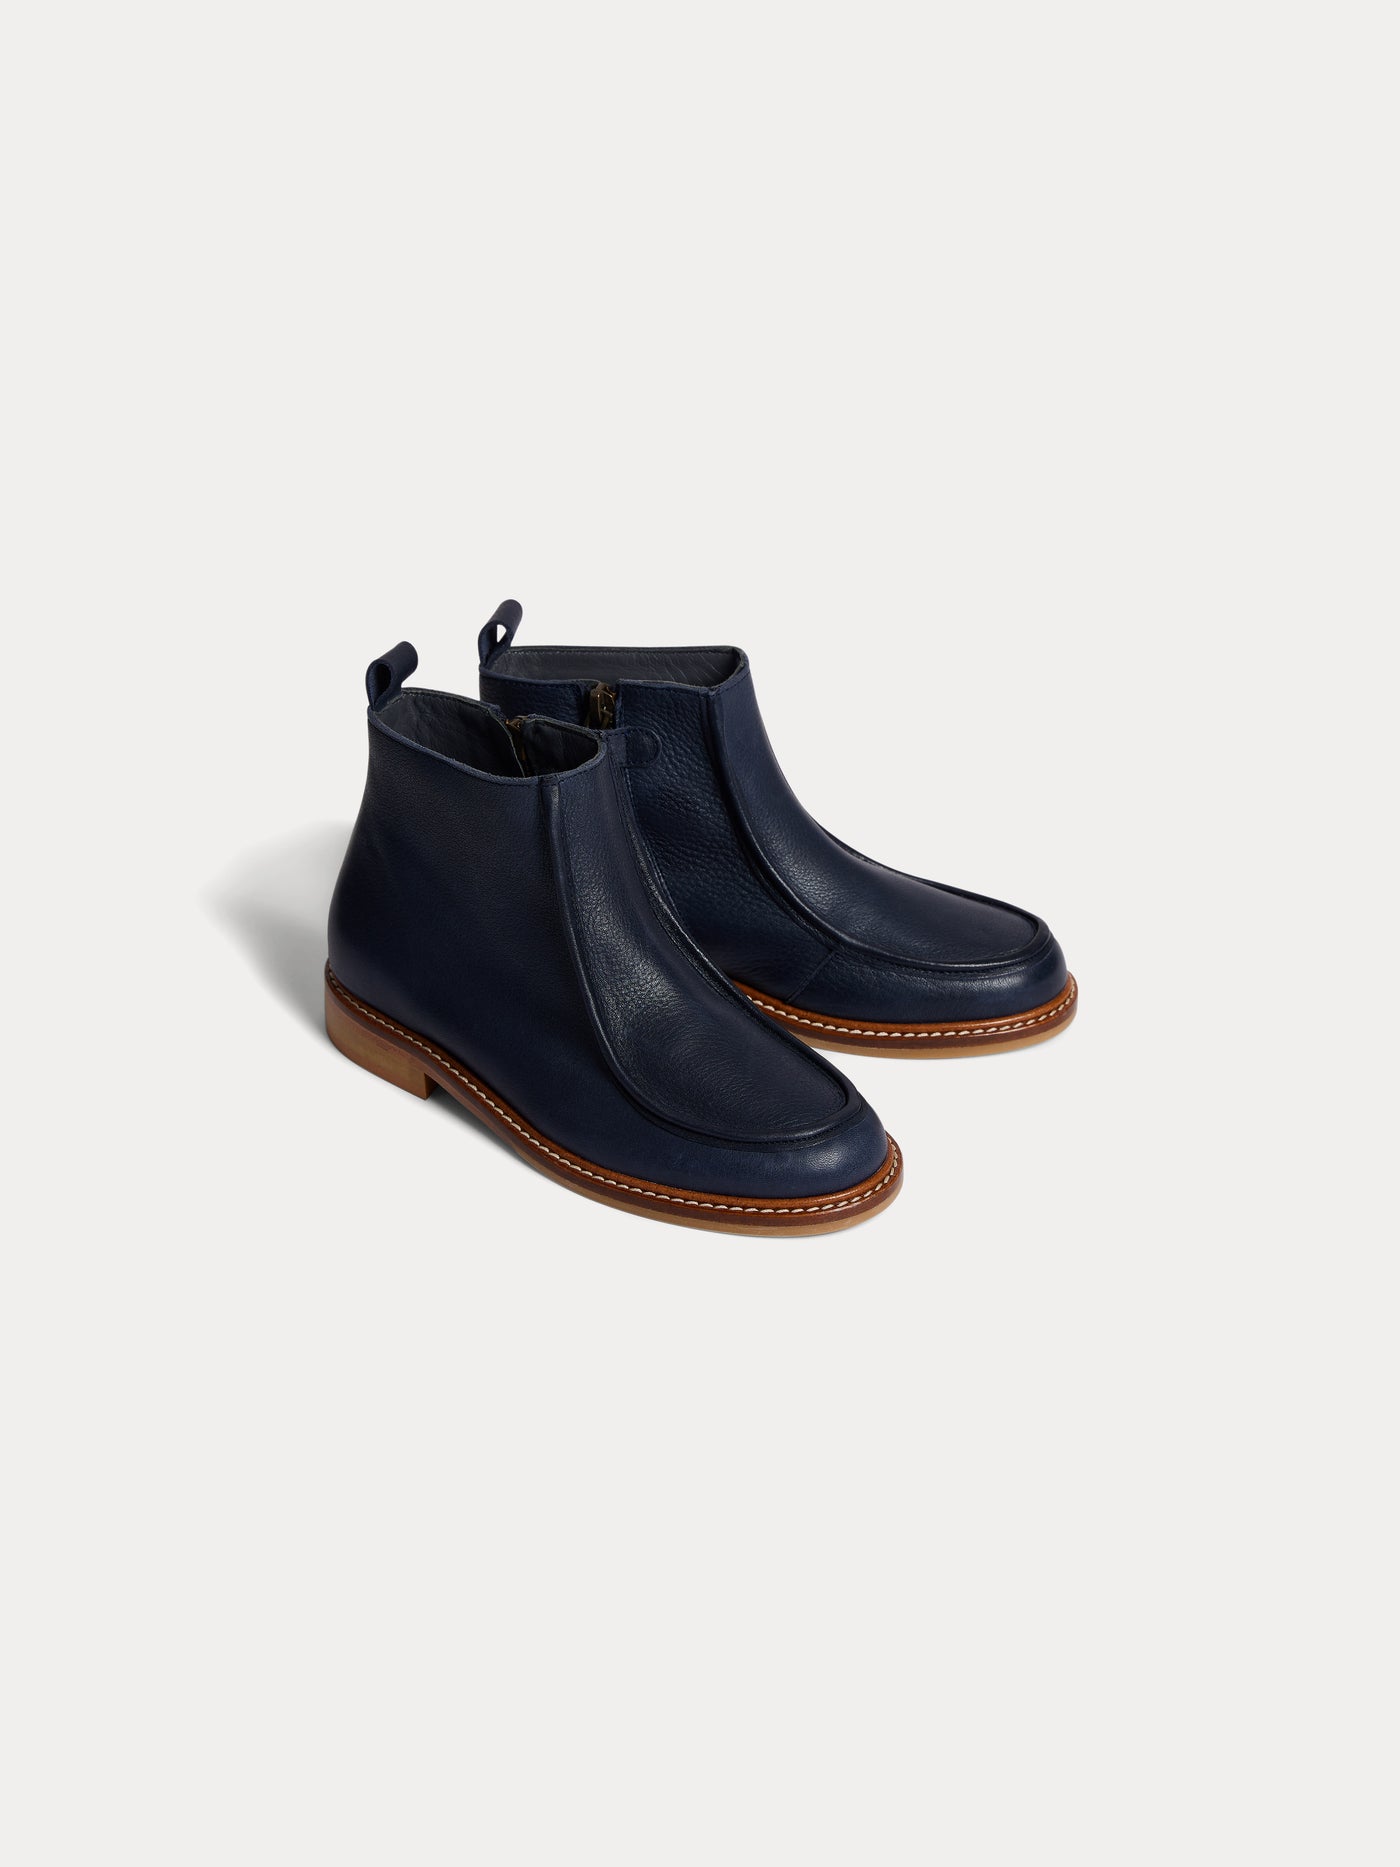 Galila boots in dark blue leather